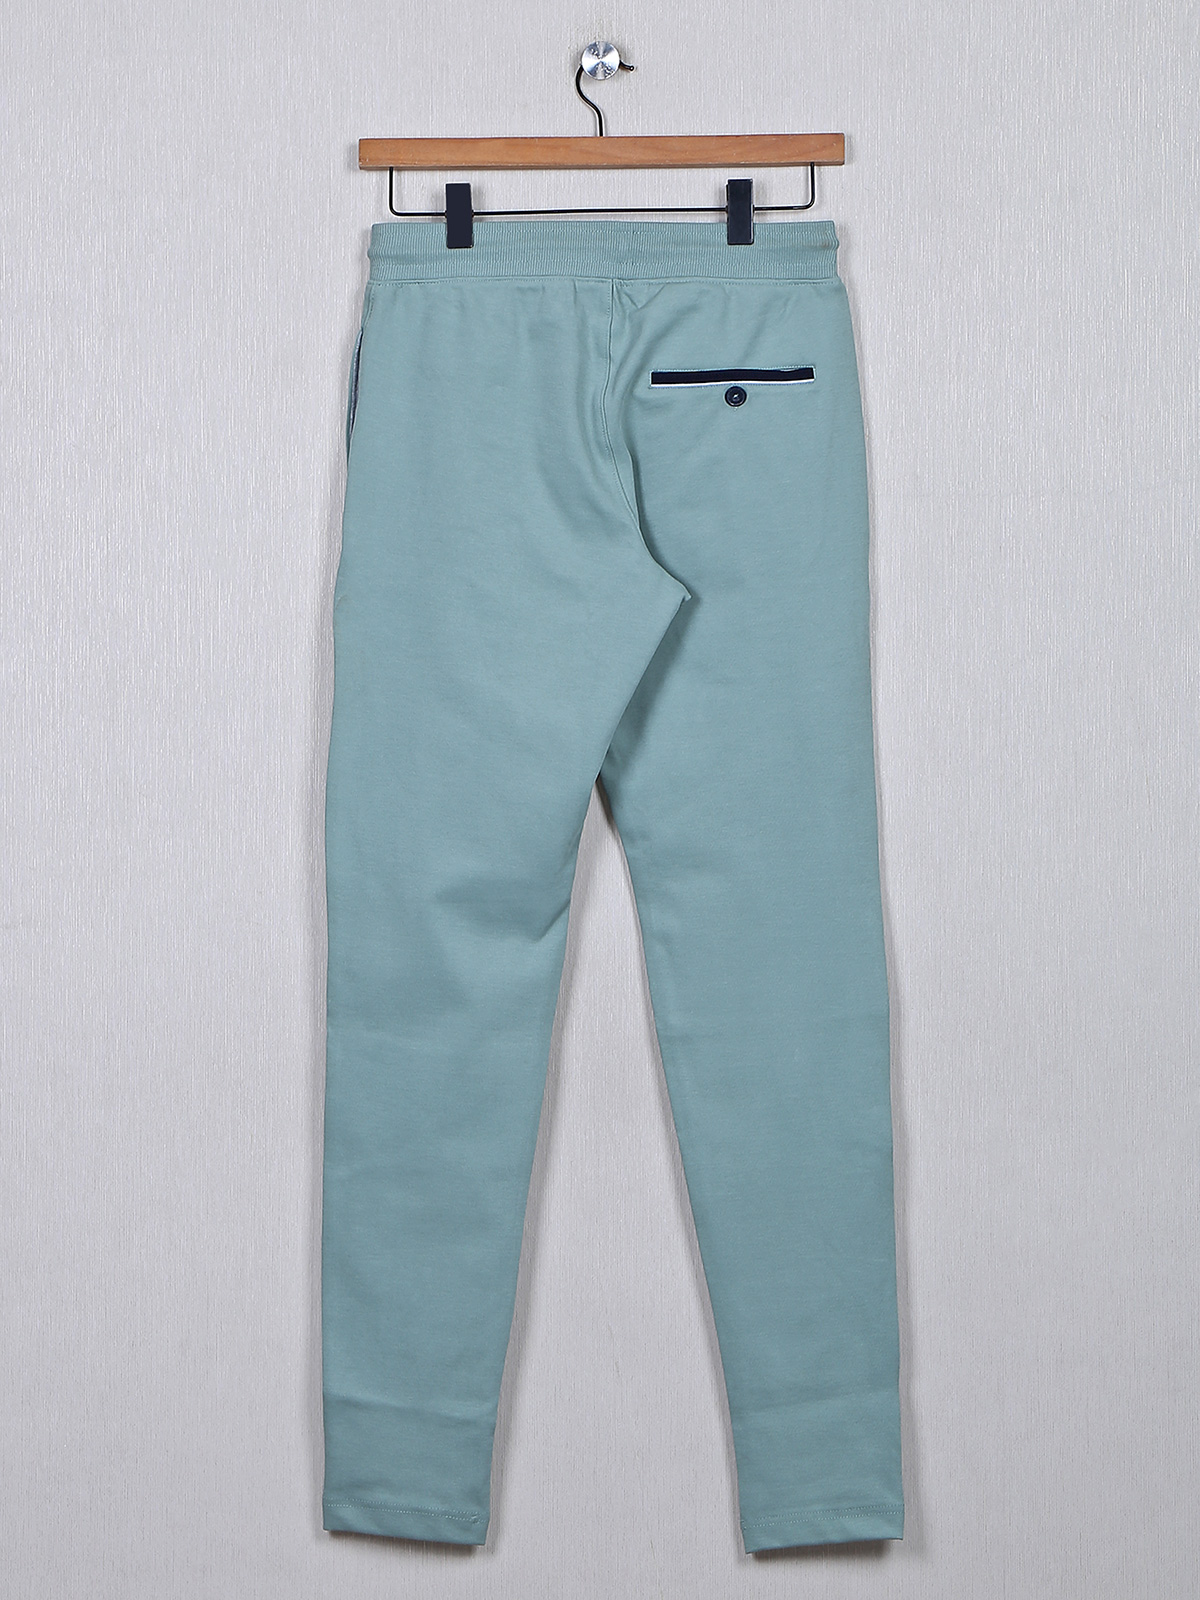 Buy Cotton Teal Blue Track pants for Women online in India - Cupidclothings  – Cupid Clothings